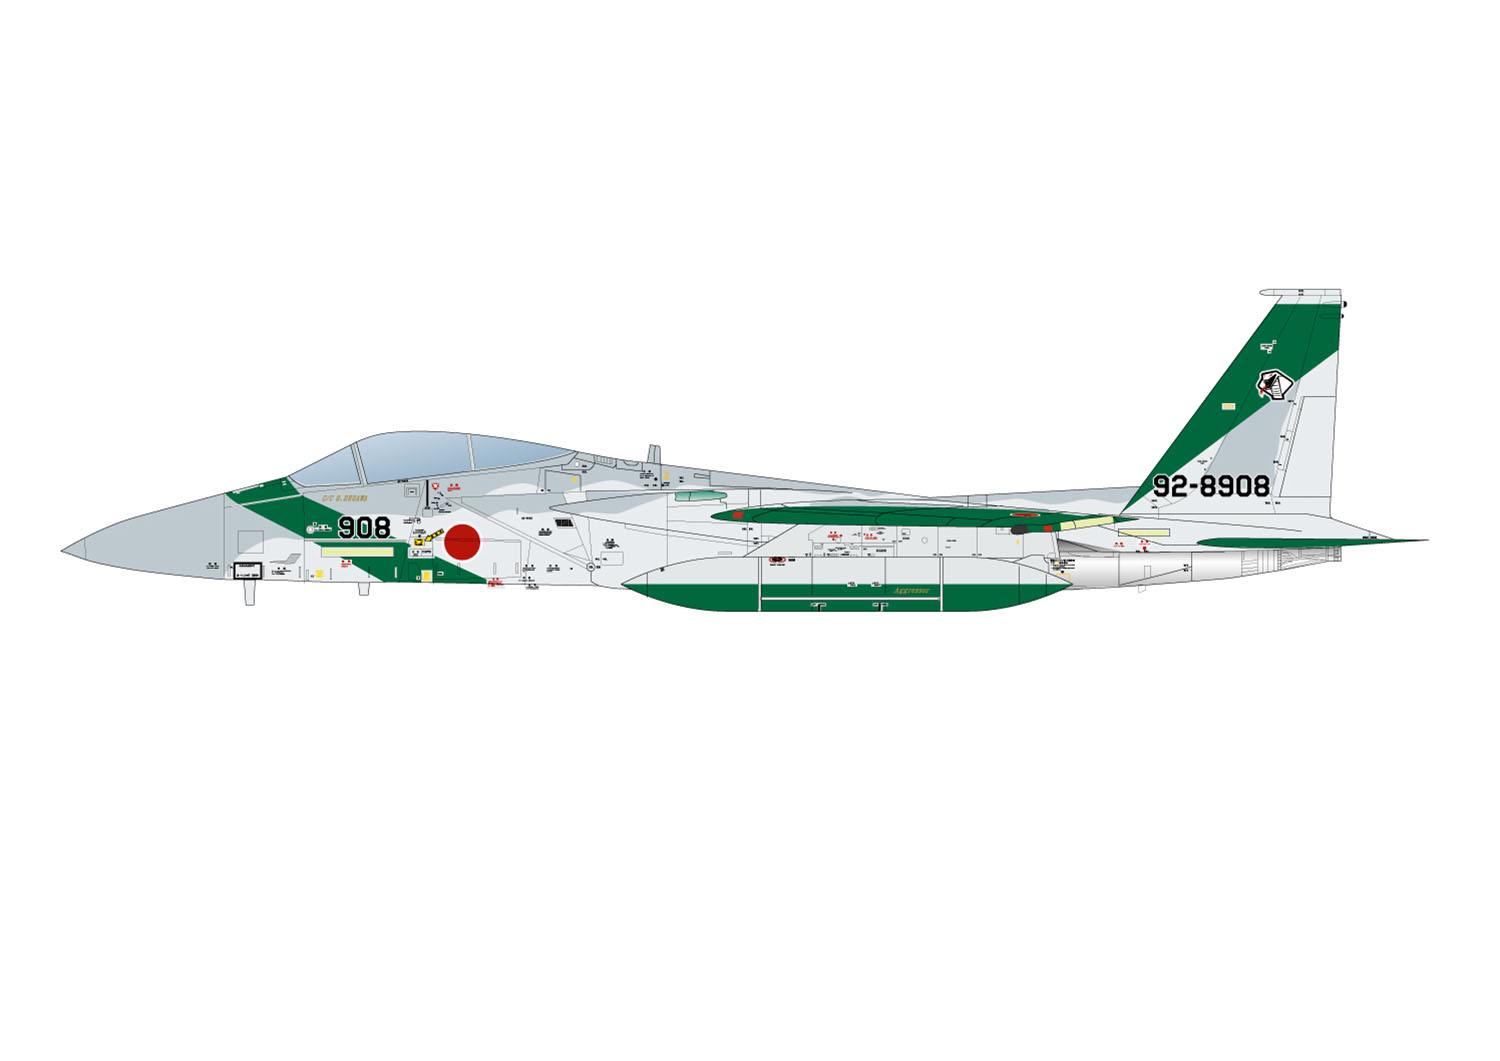 1/72 JASDF F-15J EAGLE AGGRESSOR No. 908 of the Tactical Fighter